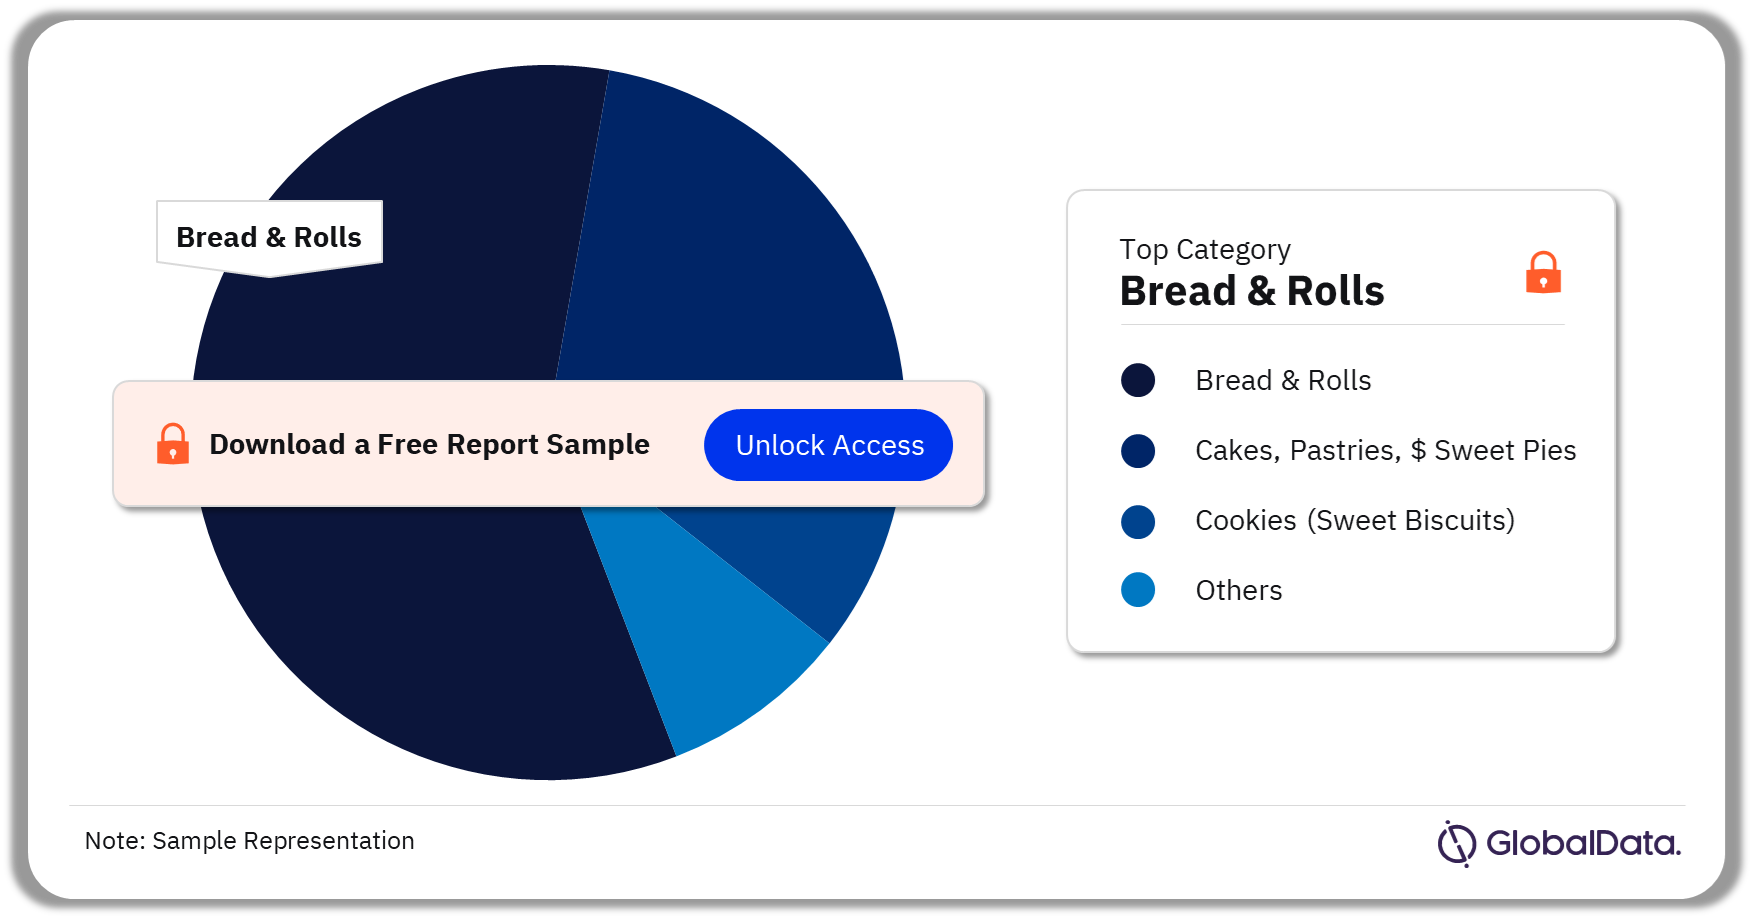 Bakery and Cereals Market Analysis by Categories, 2022 (%)